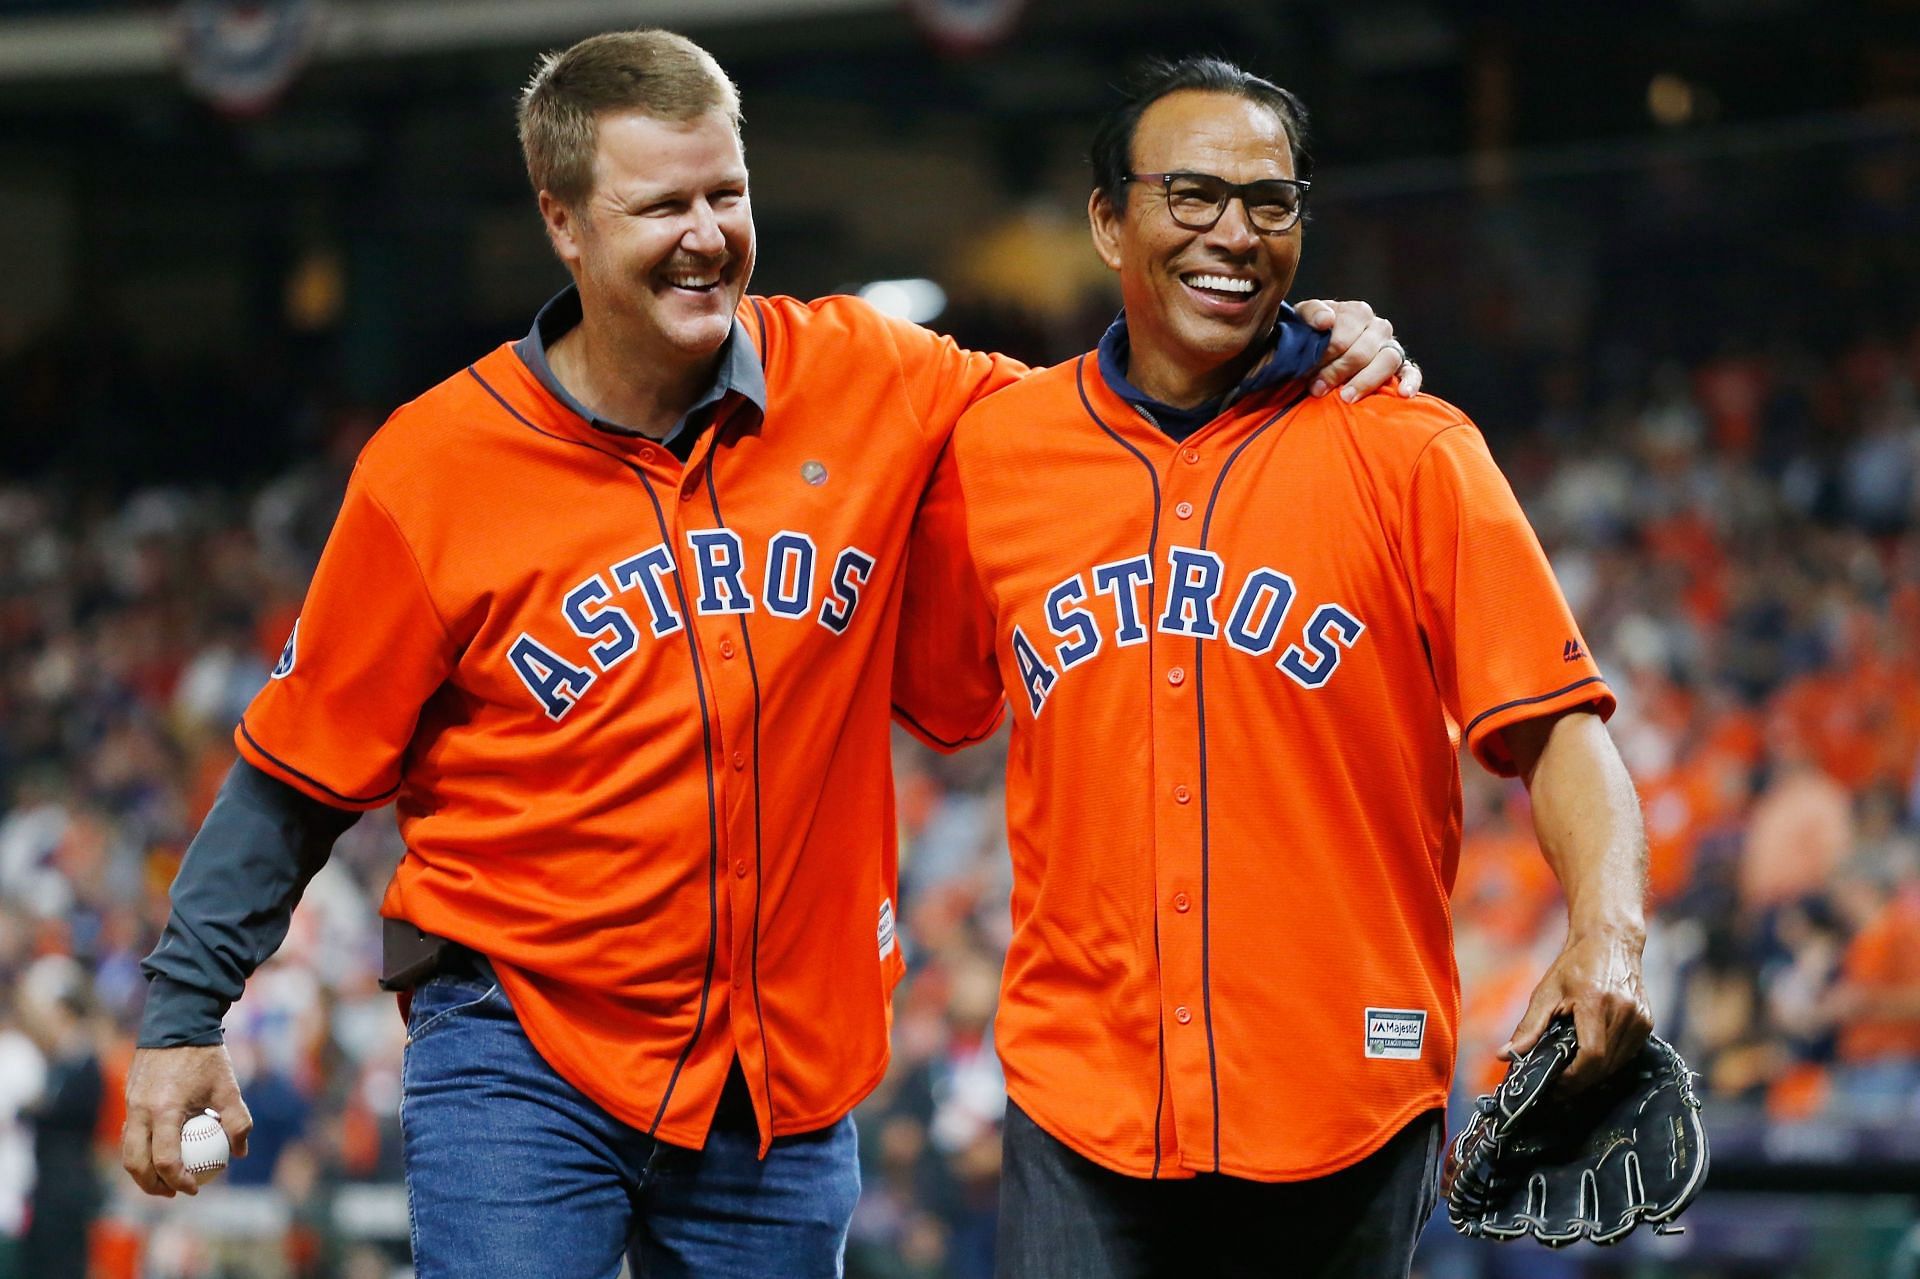 Was Jose Cruz inducted into the Texas Sports Hall of Fame? Astros legend  accorded major honor